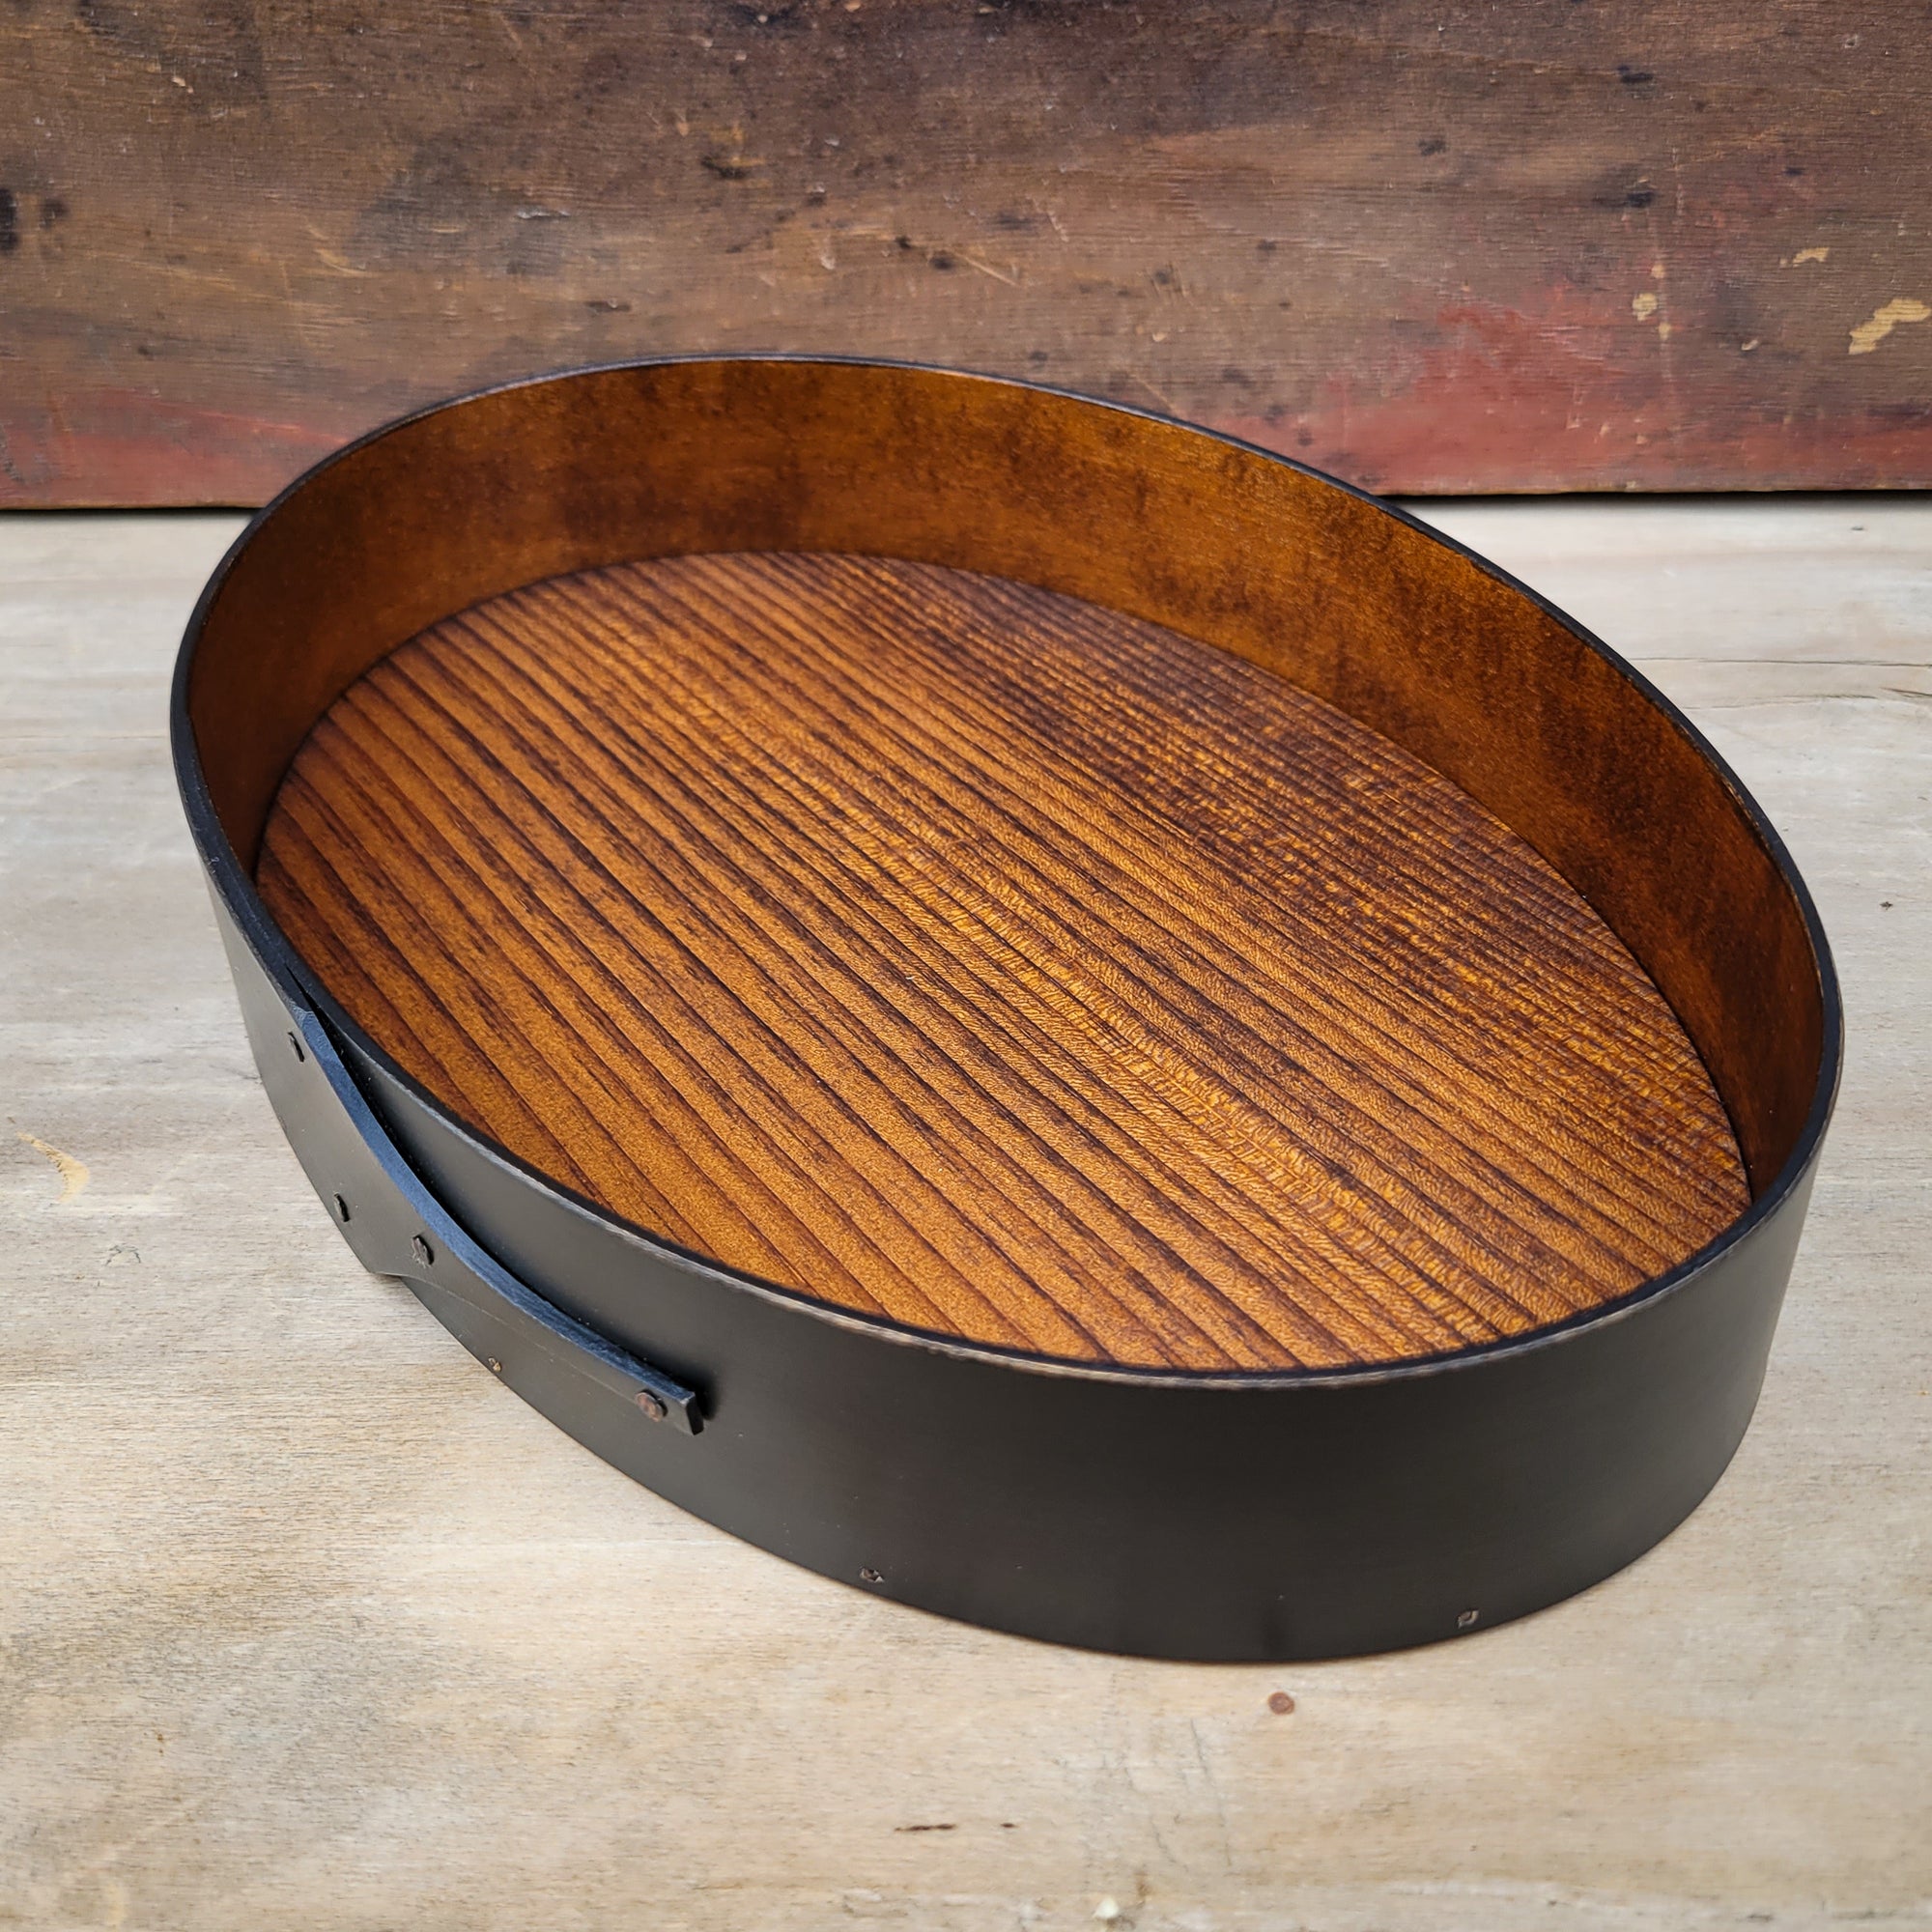 Shaker Style Oval Stitchers Tray, LeHays Shaker Boxes, Handcrafted in Maine, Black Milk Paint Finish, Side View